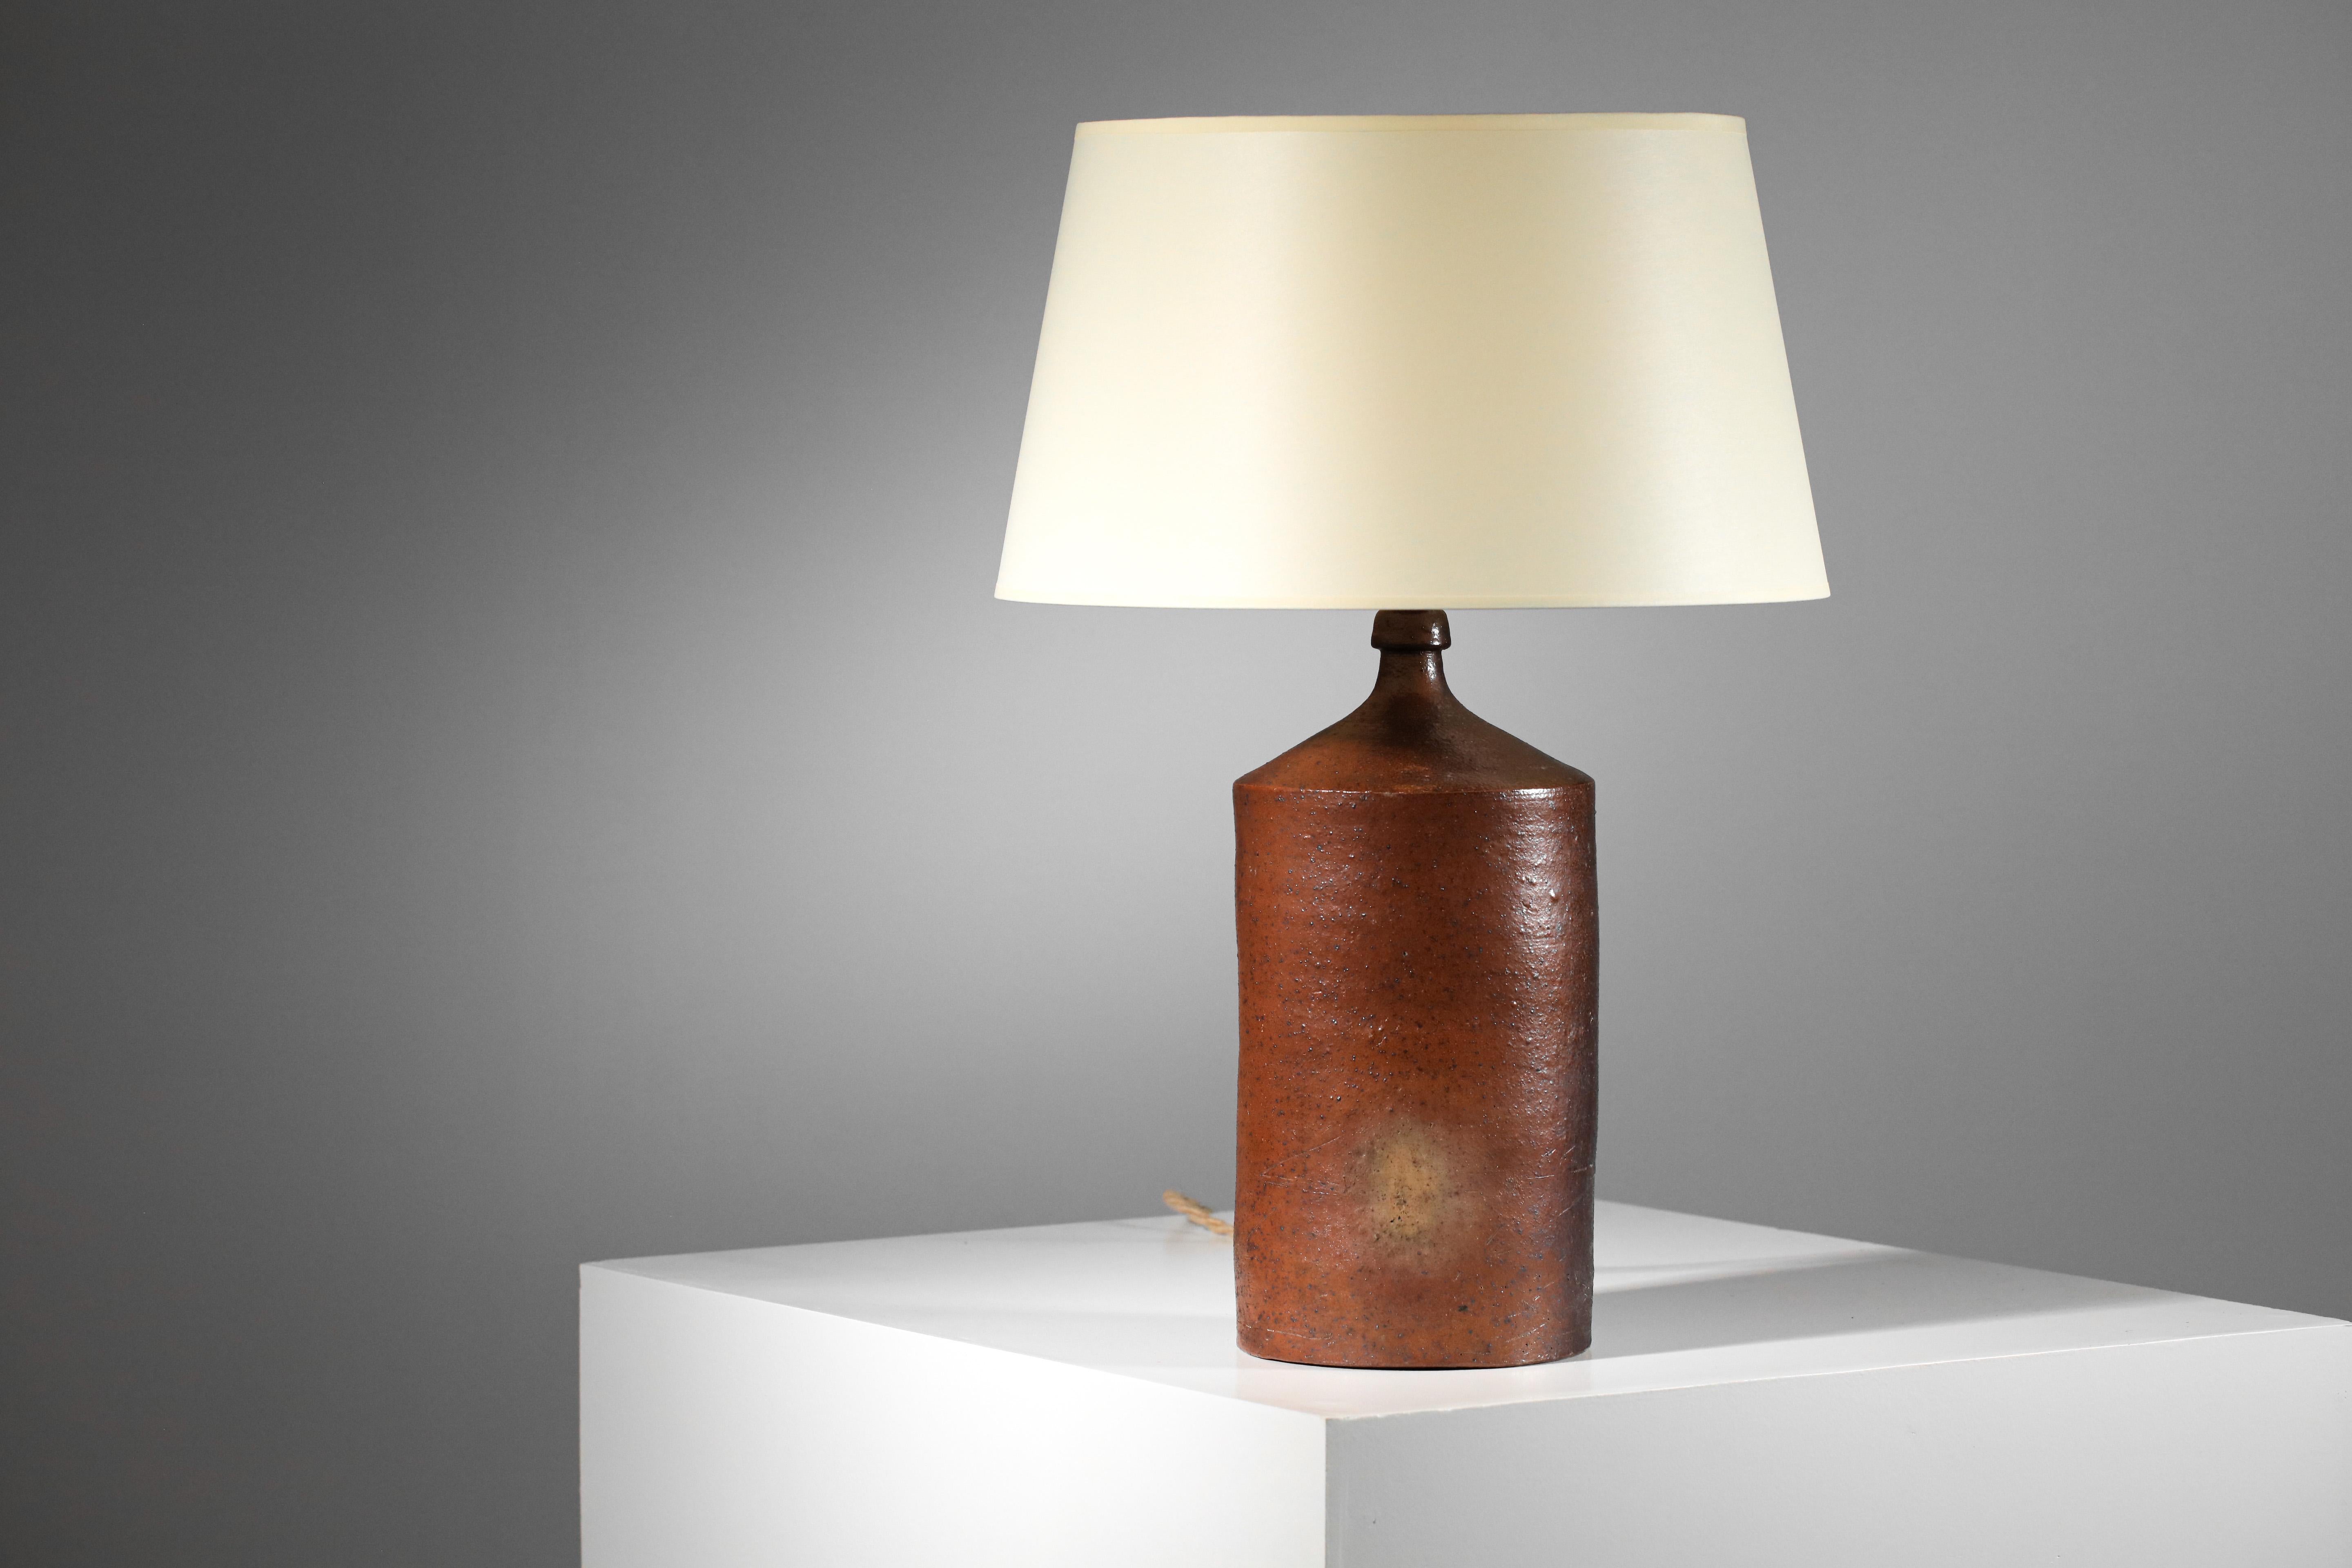 Ceramic lamp base La Borne 1960s chamotte clay French  popular art unic piece In Good Condition For Sale In Lyon, FR